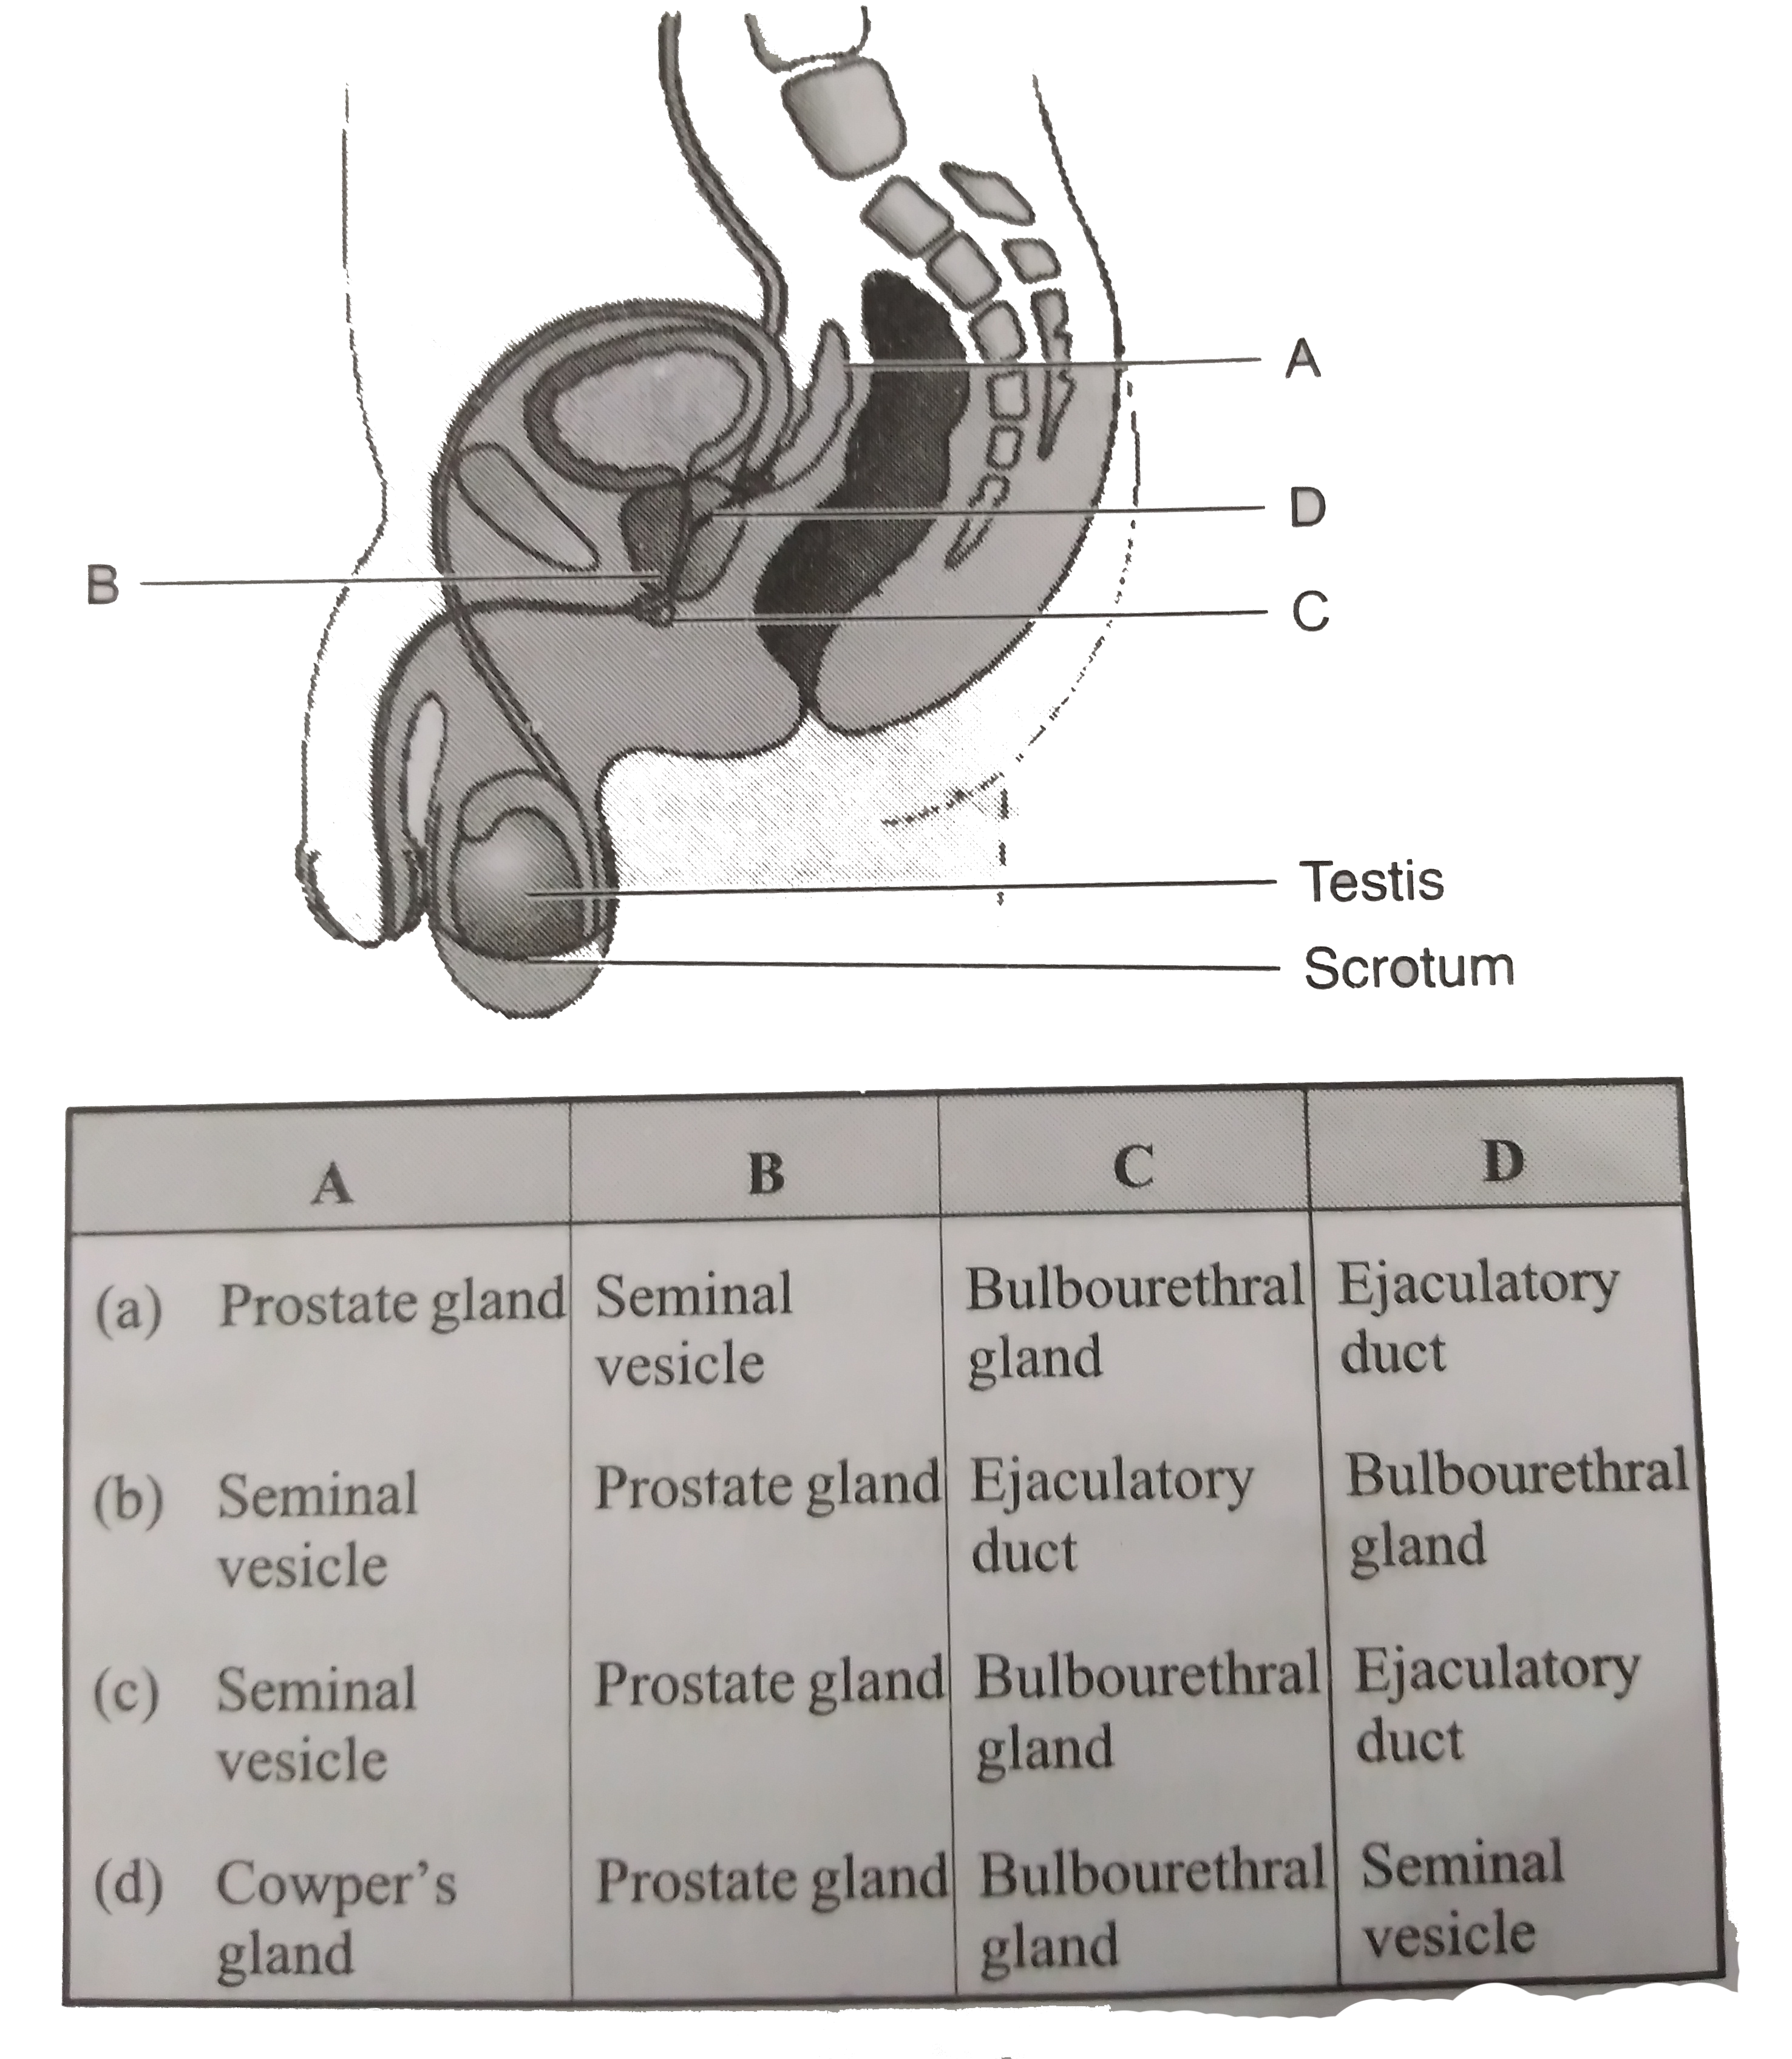 Diagrammatic sectional view of male pelvis showing reproductive system Is given below. Select the correct option: